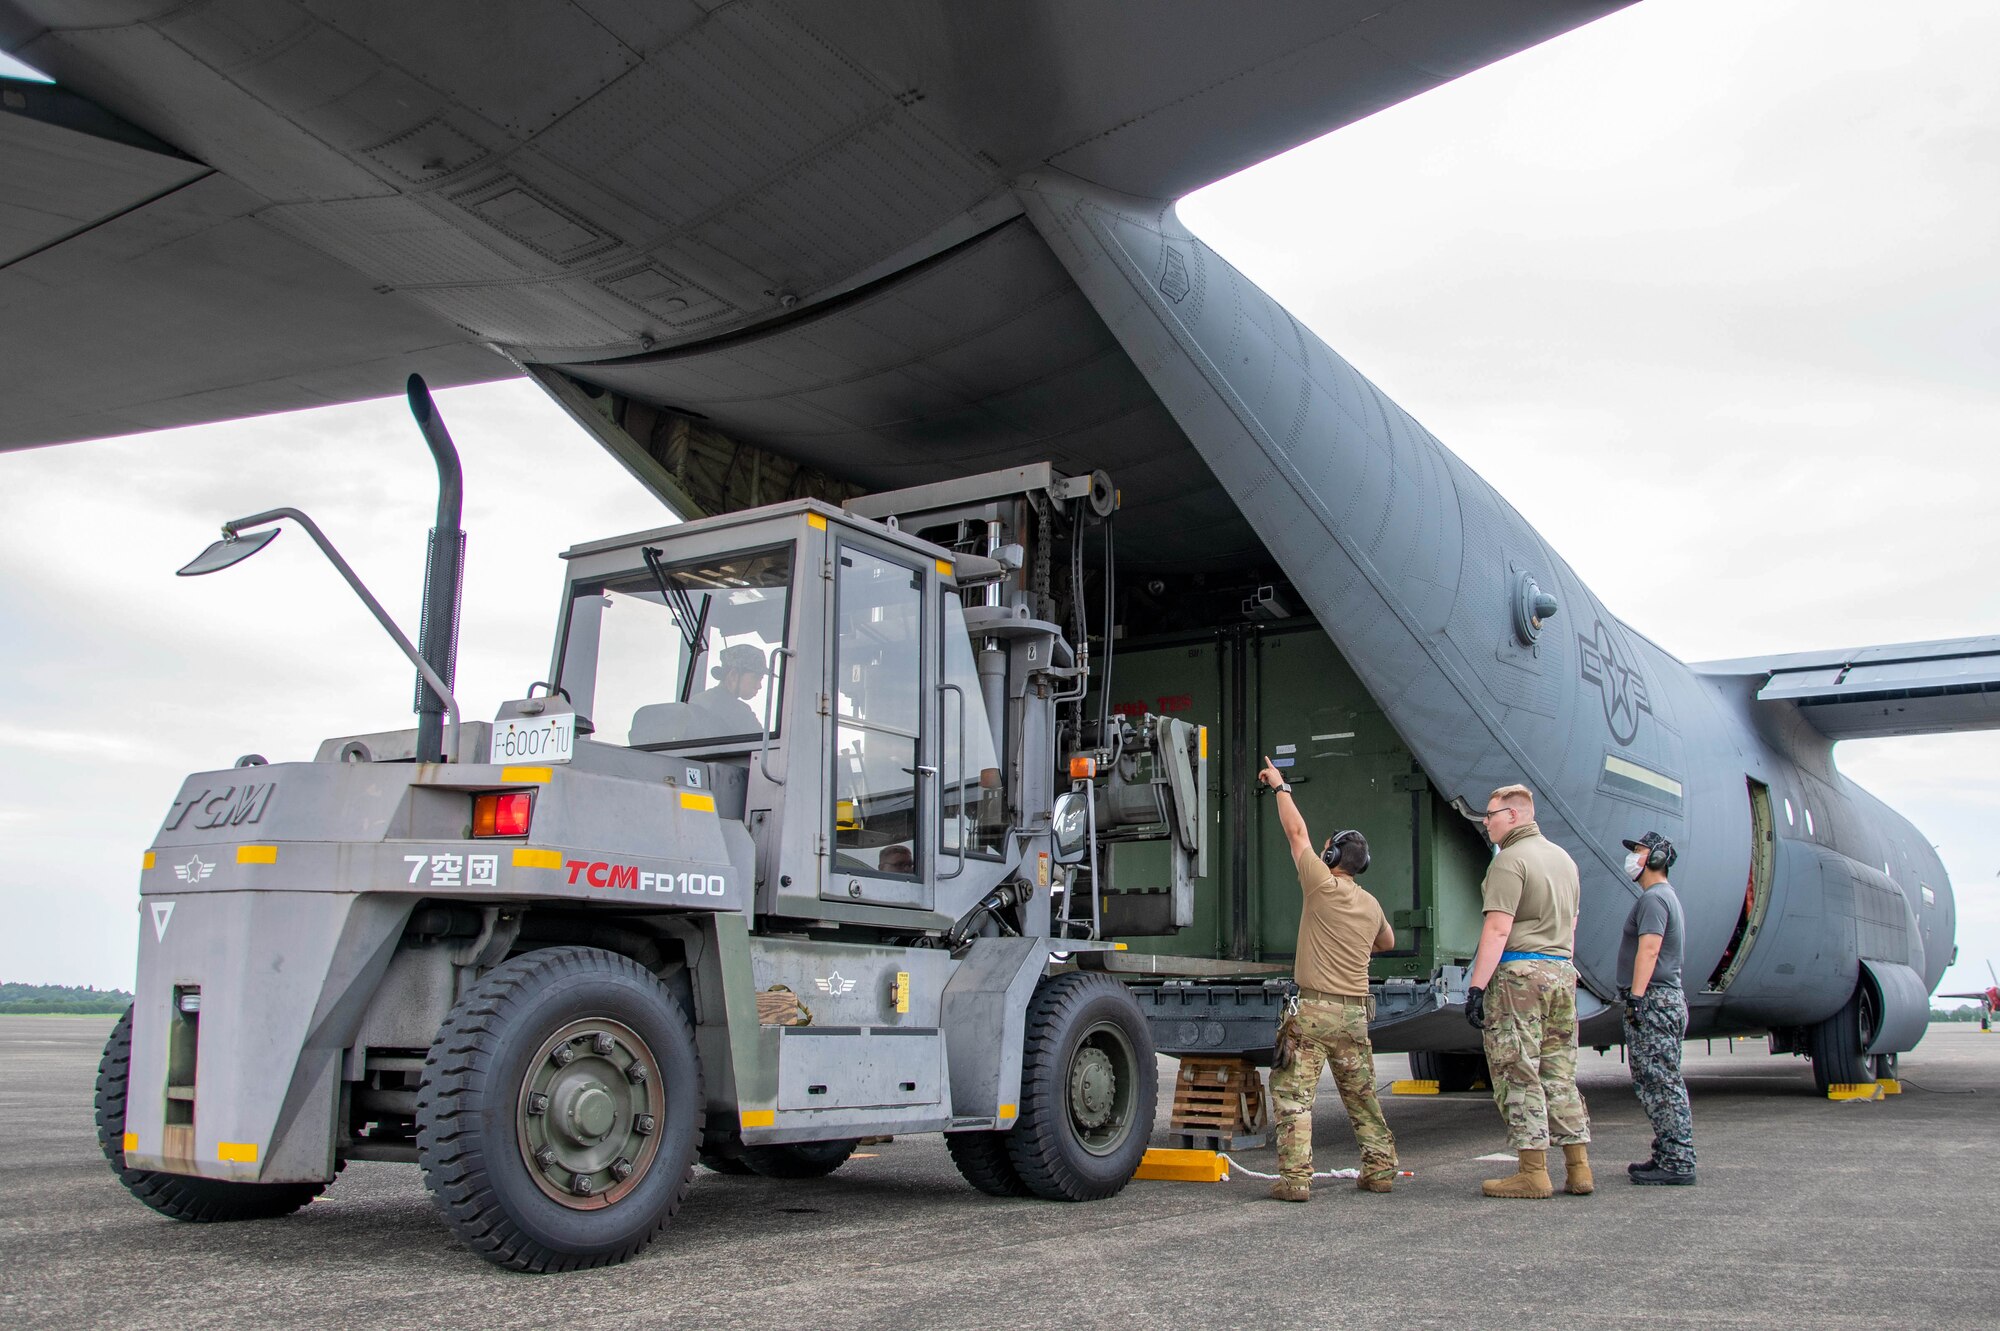 Airmen and JASDF unload cargo from an aircraft.